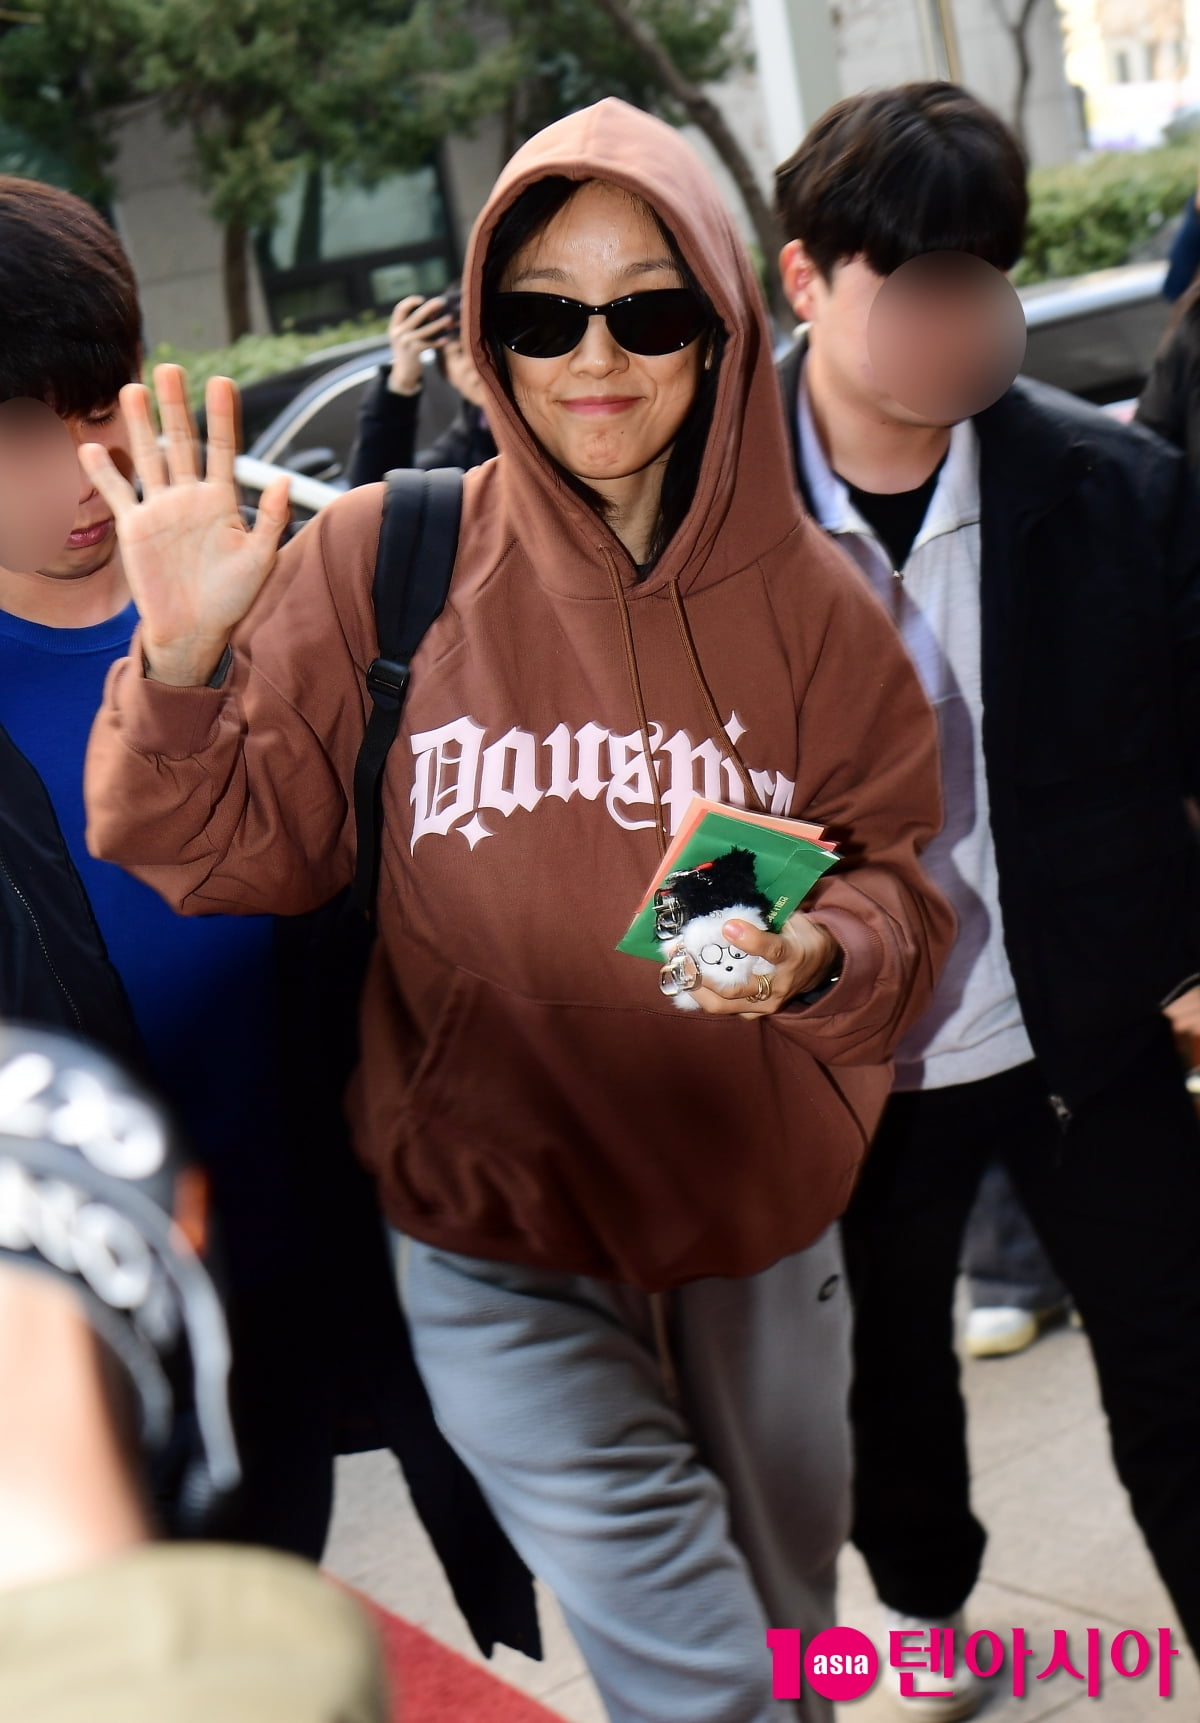 Hyori Lee, a strong sister who knows how to feel, on her way to work...beautiful smile